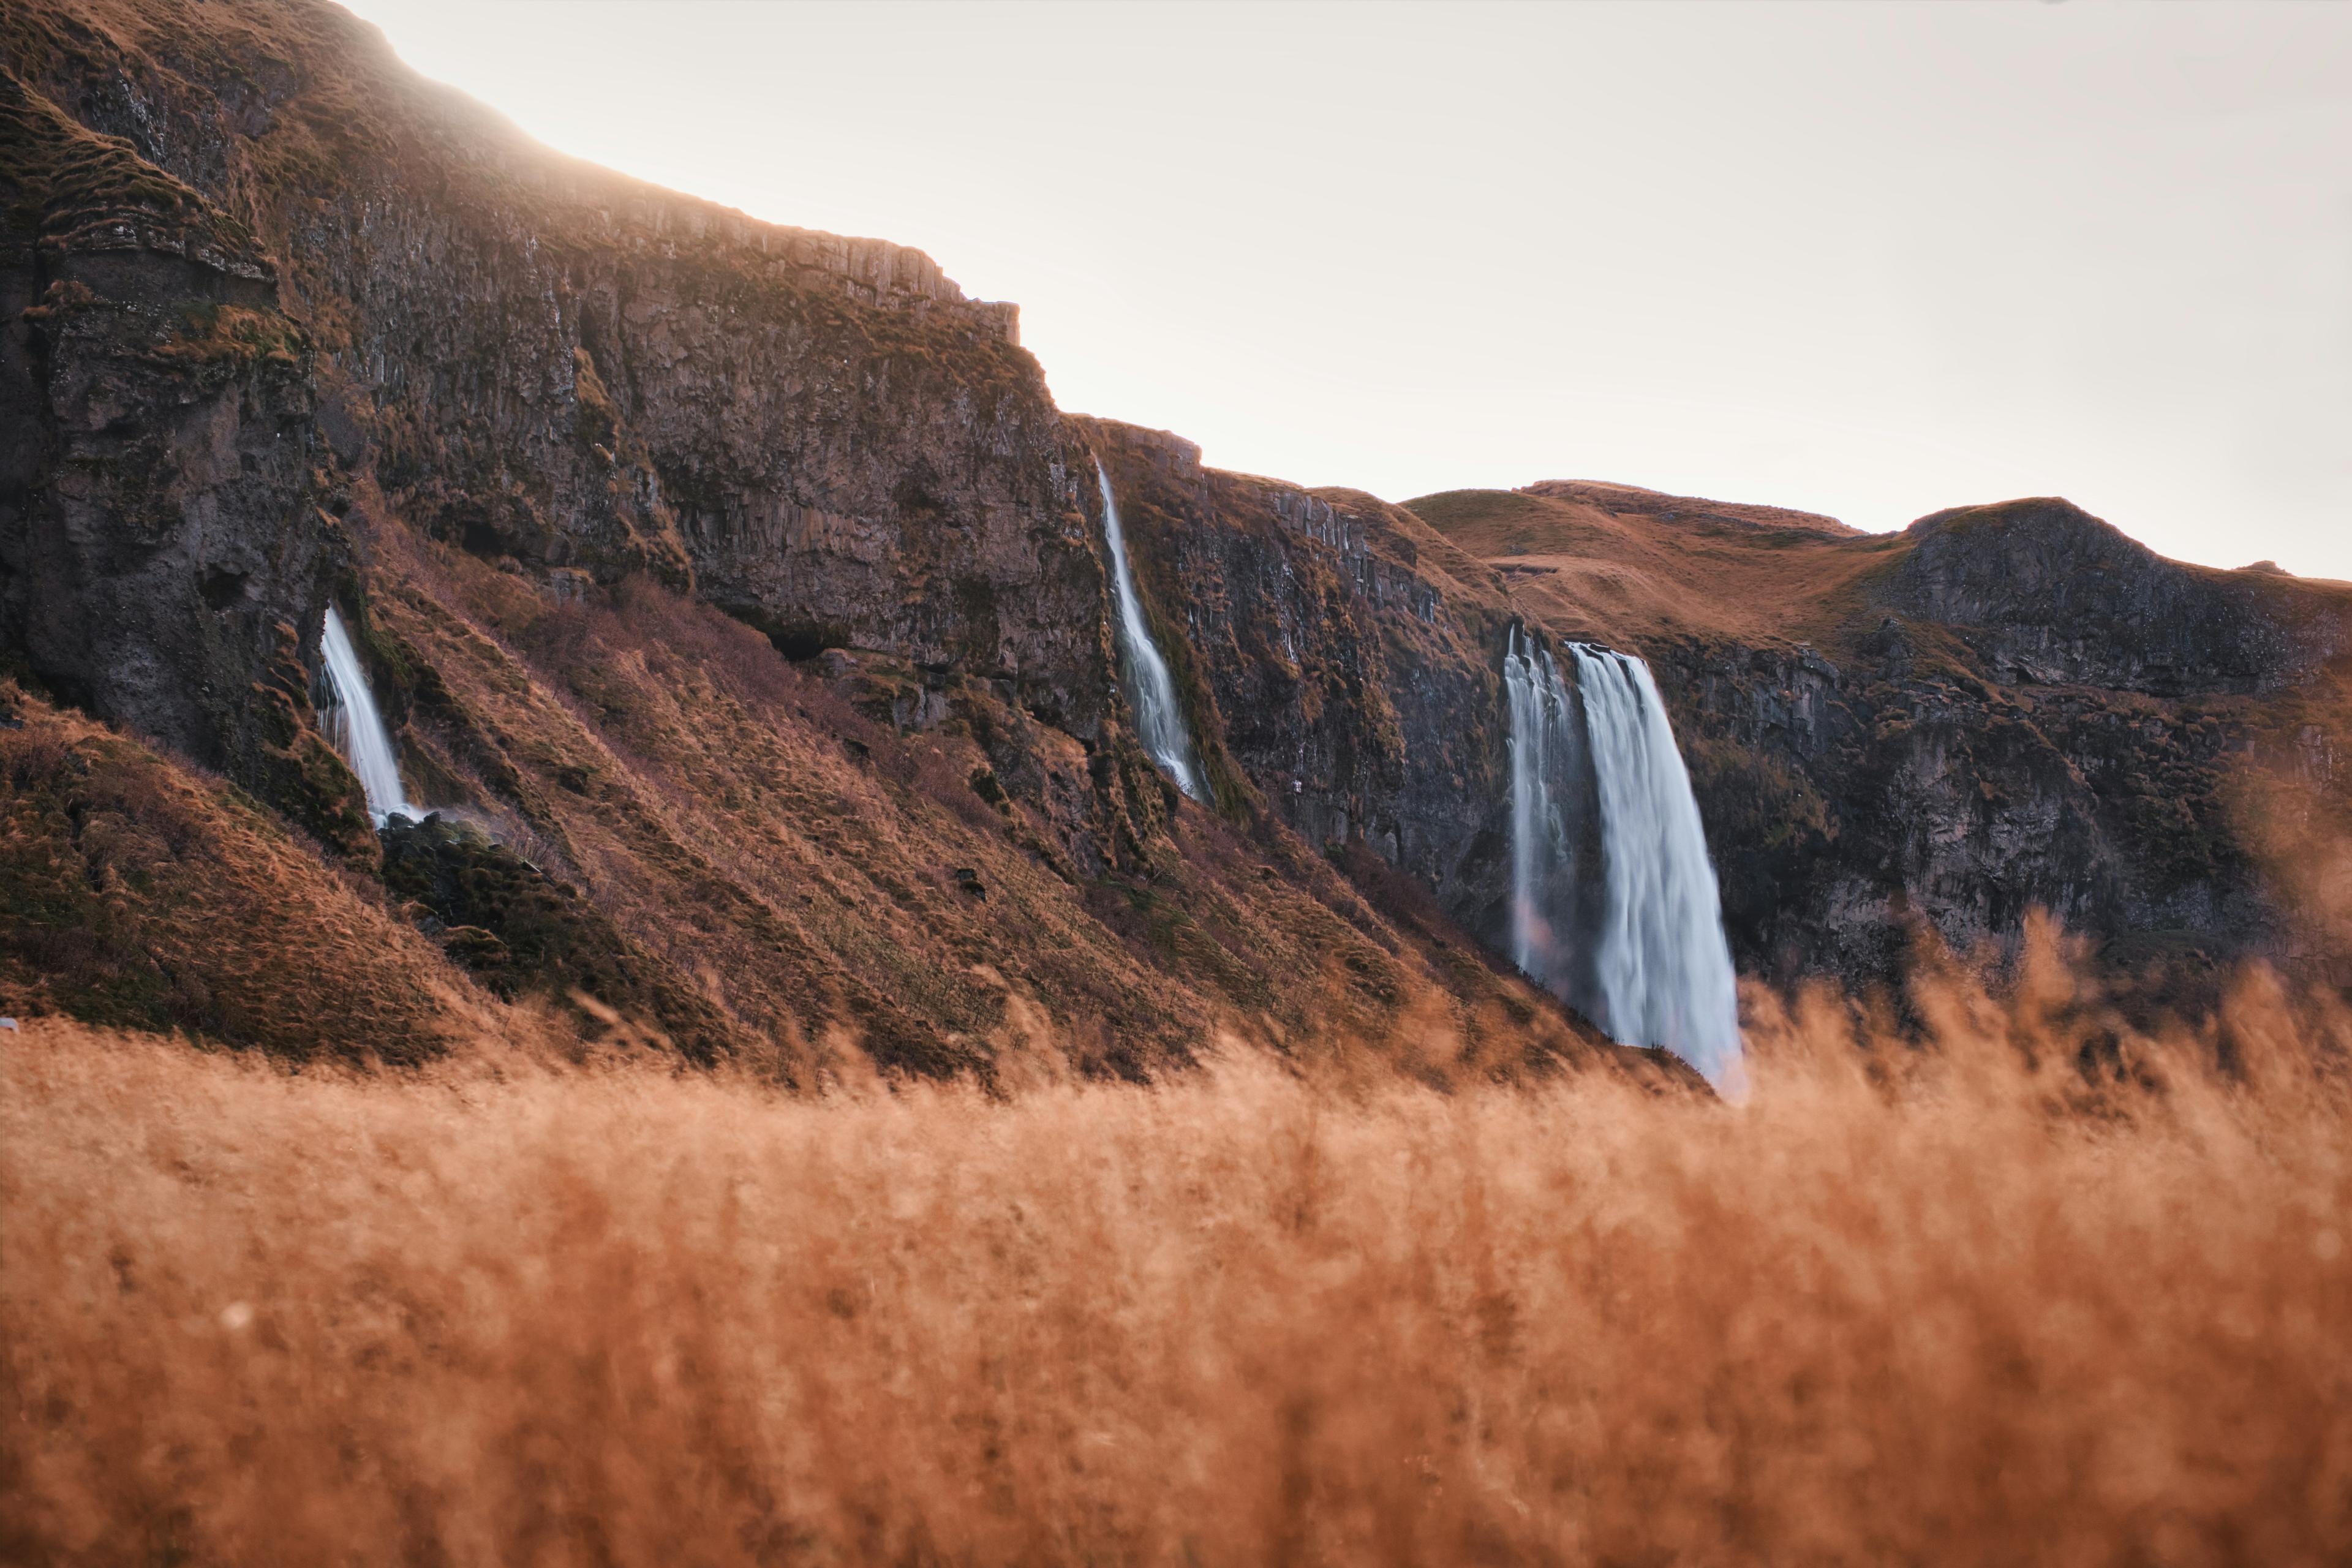 A serene landscape featuring two waterfalls descending a rocky cliff, viewed through a foreground of tall, golden grasses during a warm, glowing sunset.